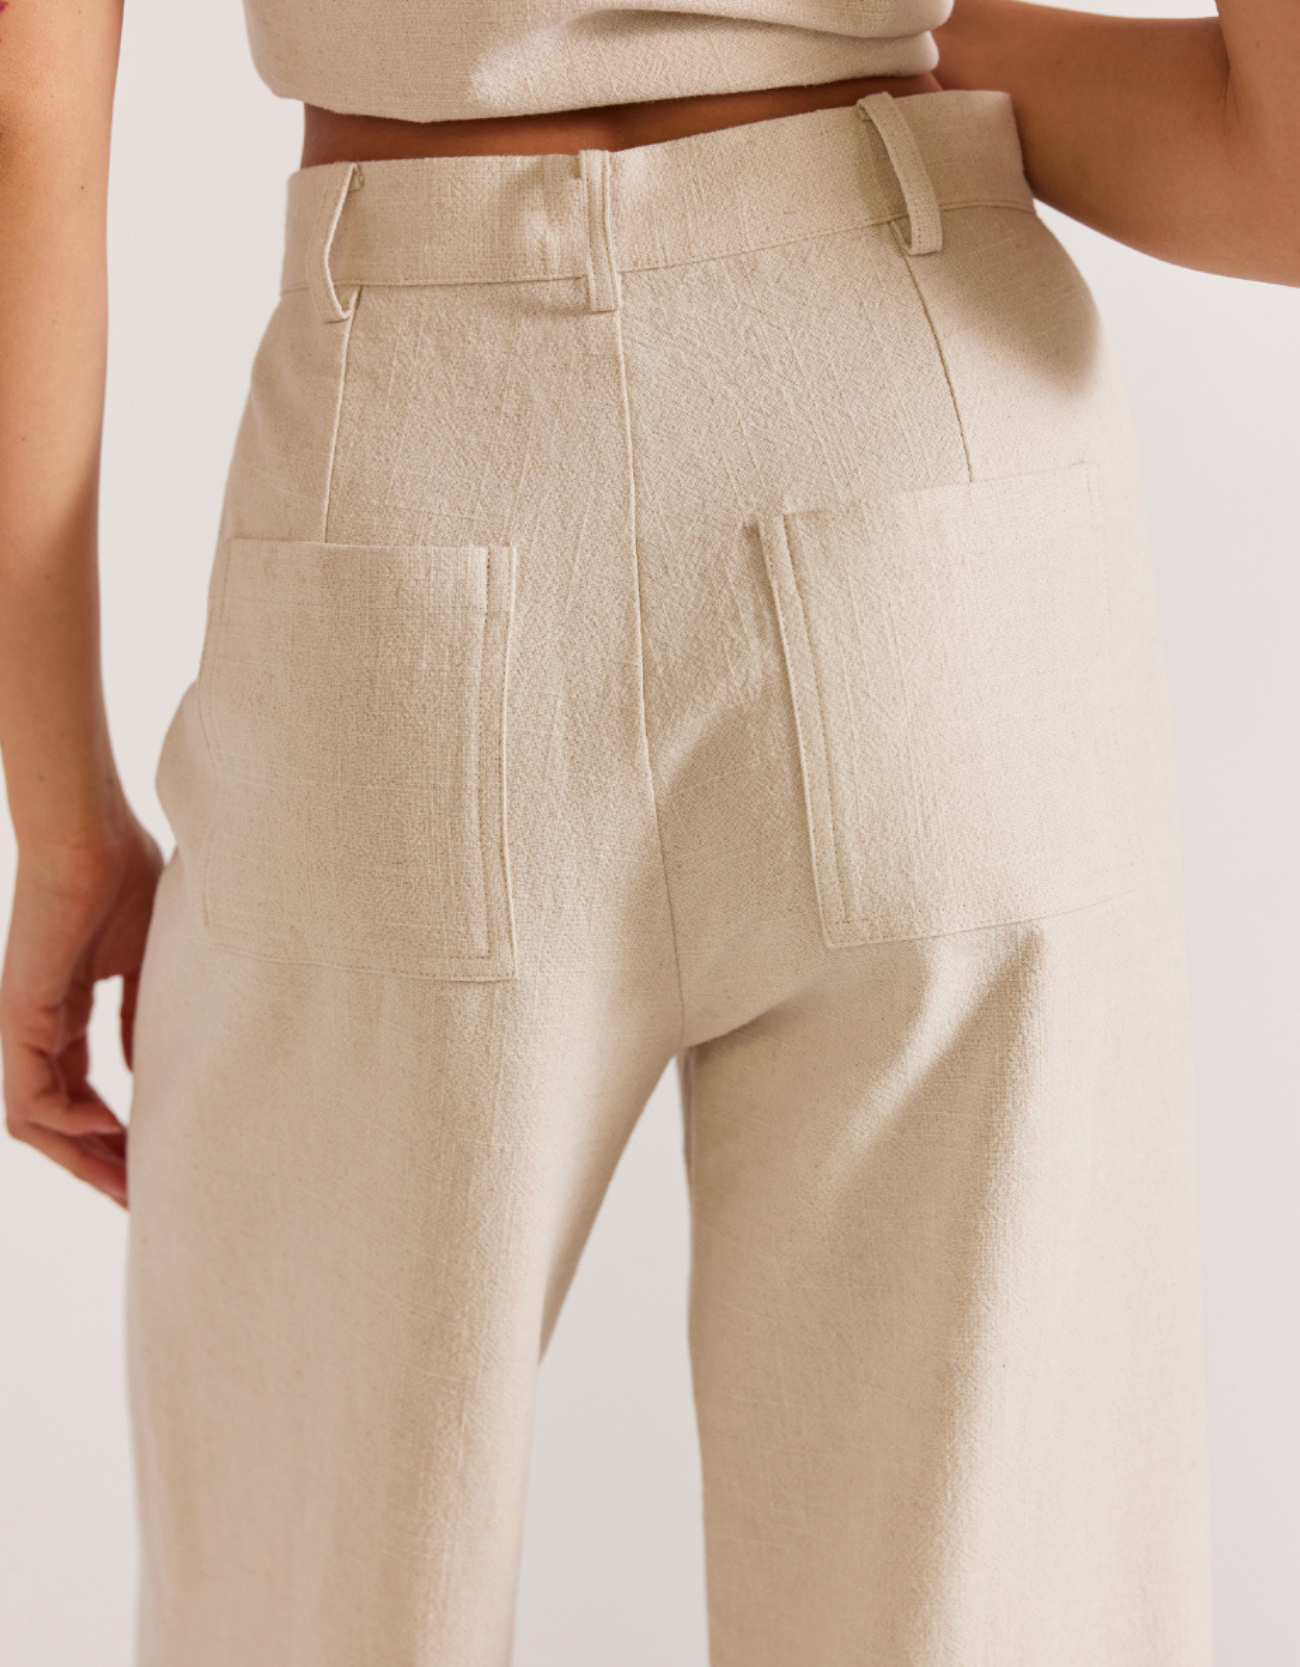 Load image into Gallery viewer, Ethos Wide Leg Pants-Natural Marle
